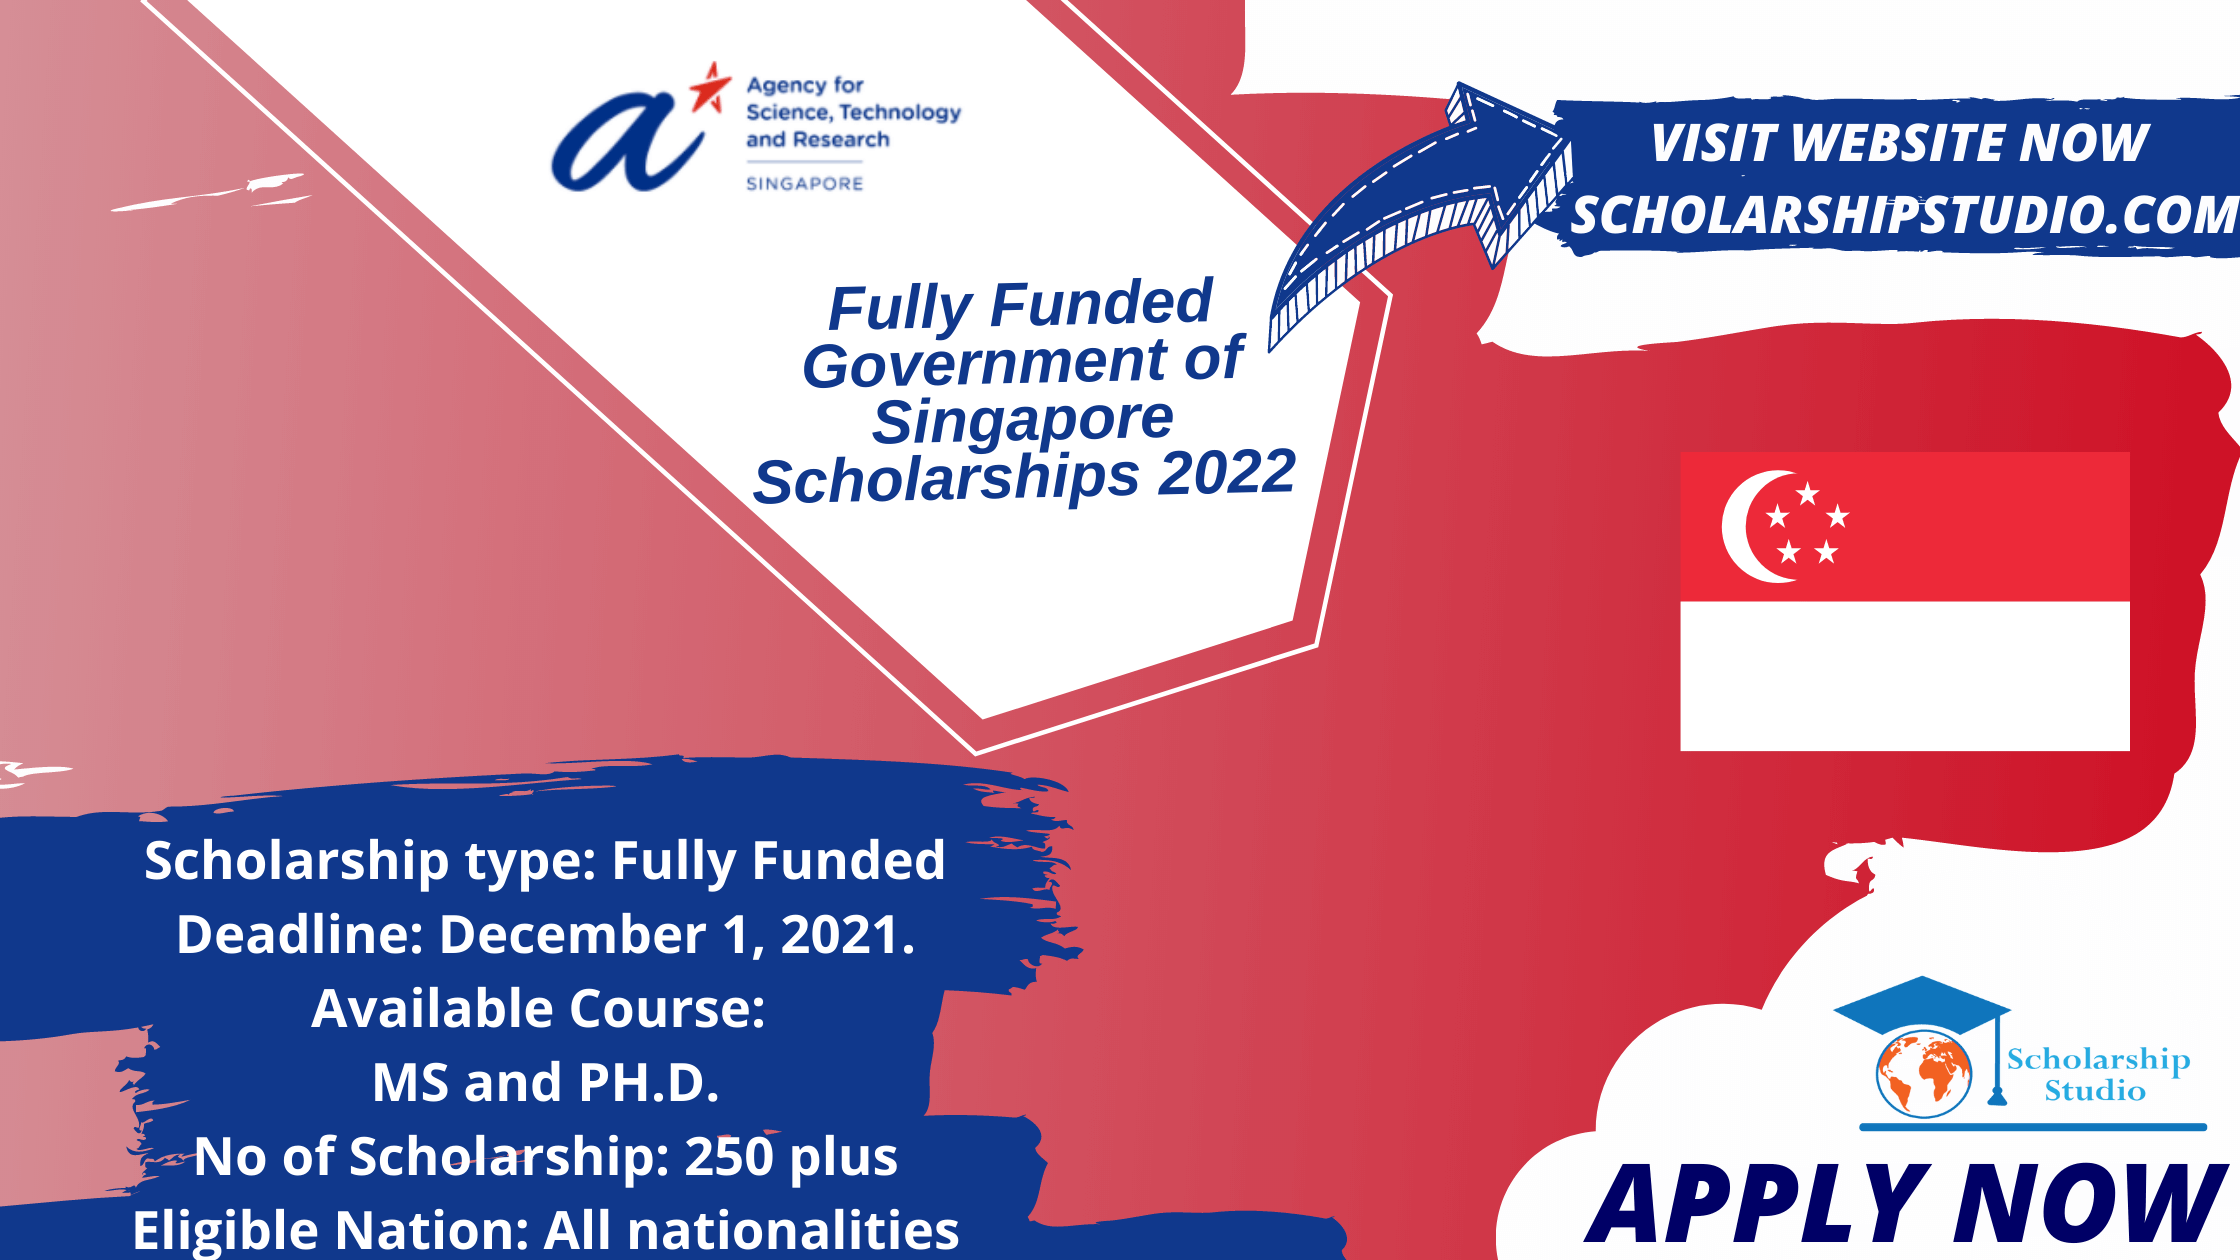 Fully Funded Government of Singapore Scholarships 2022 - Scholarship studio